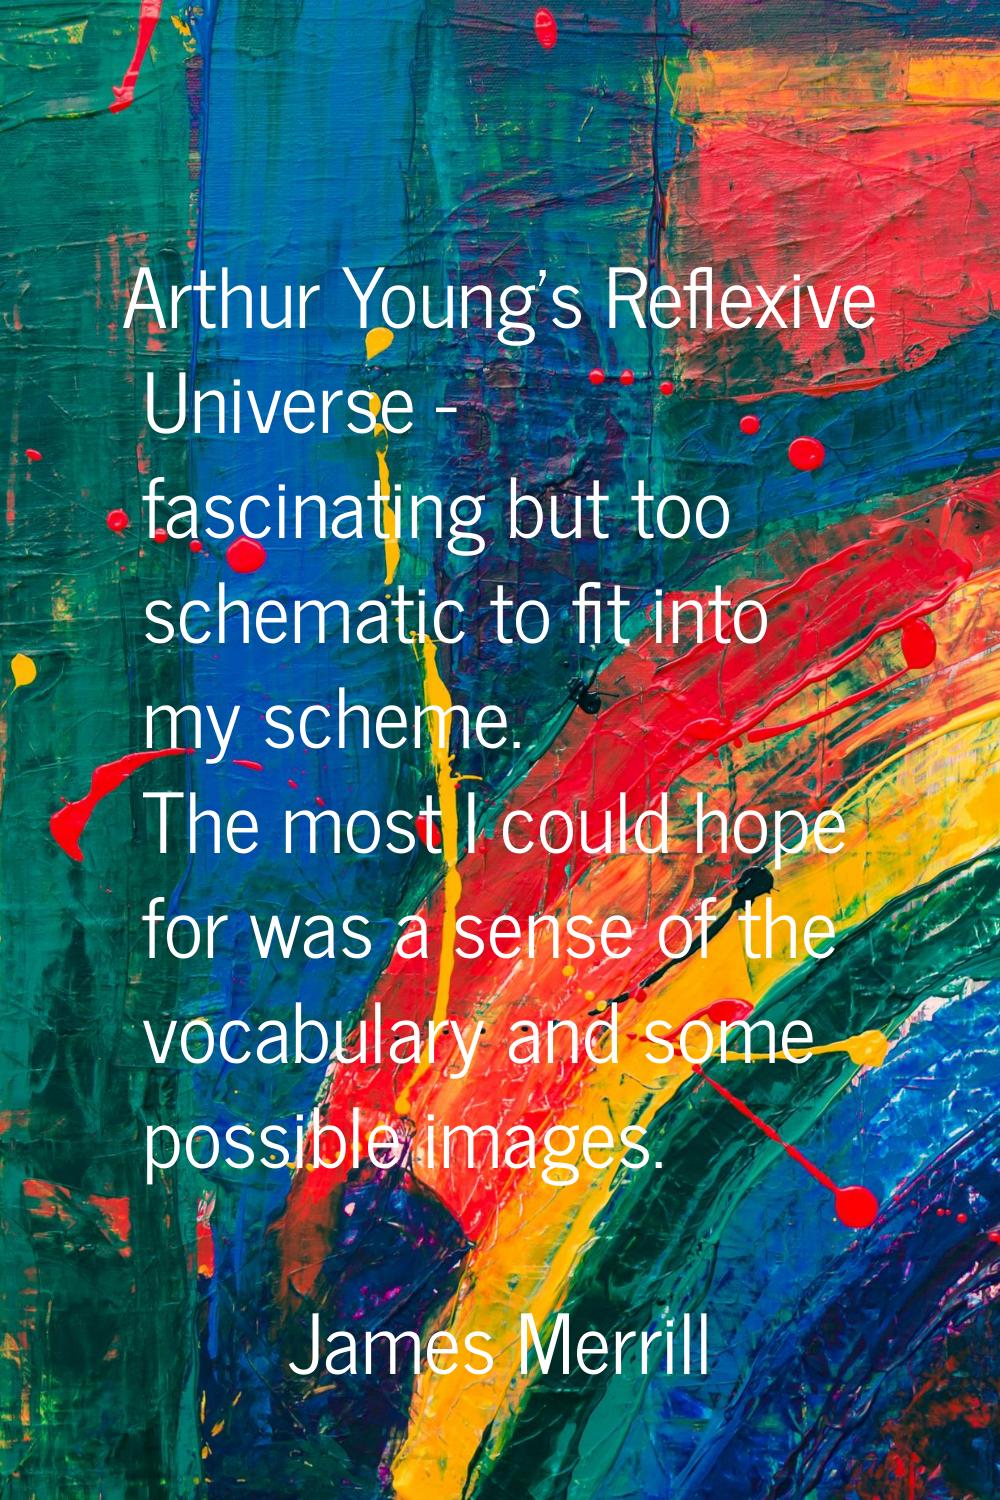 Arthur Young's Reflexive Universe - fascinating but too schematic to fit into my scheme. The most I